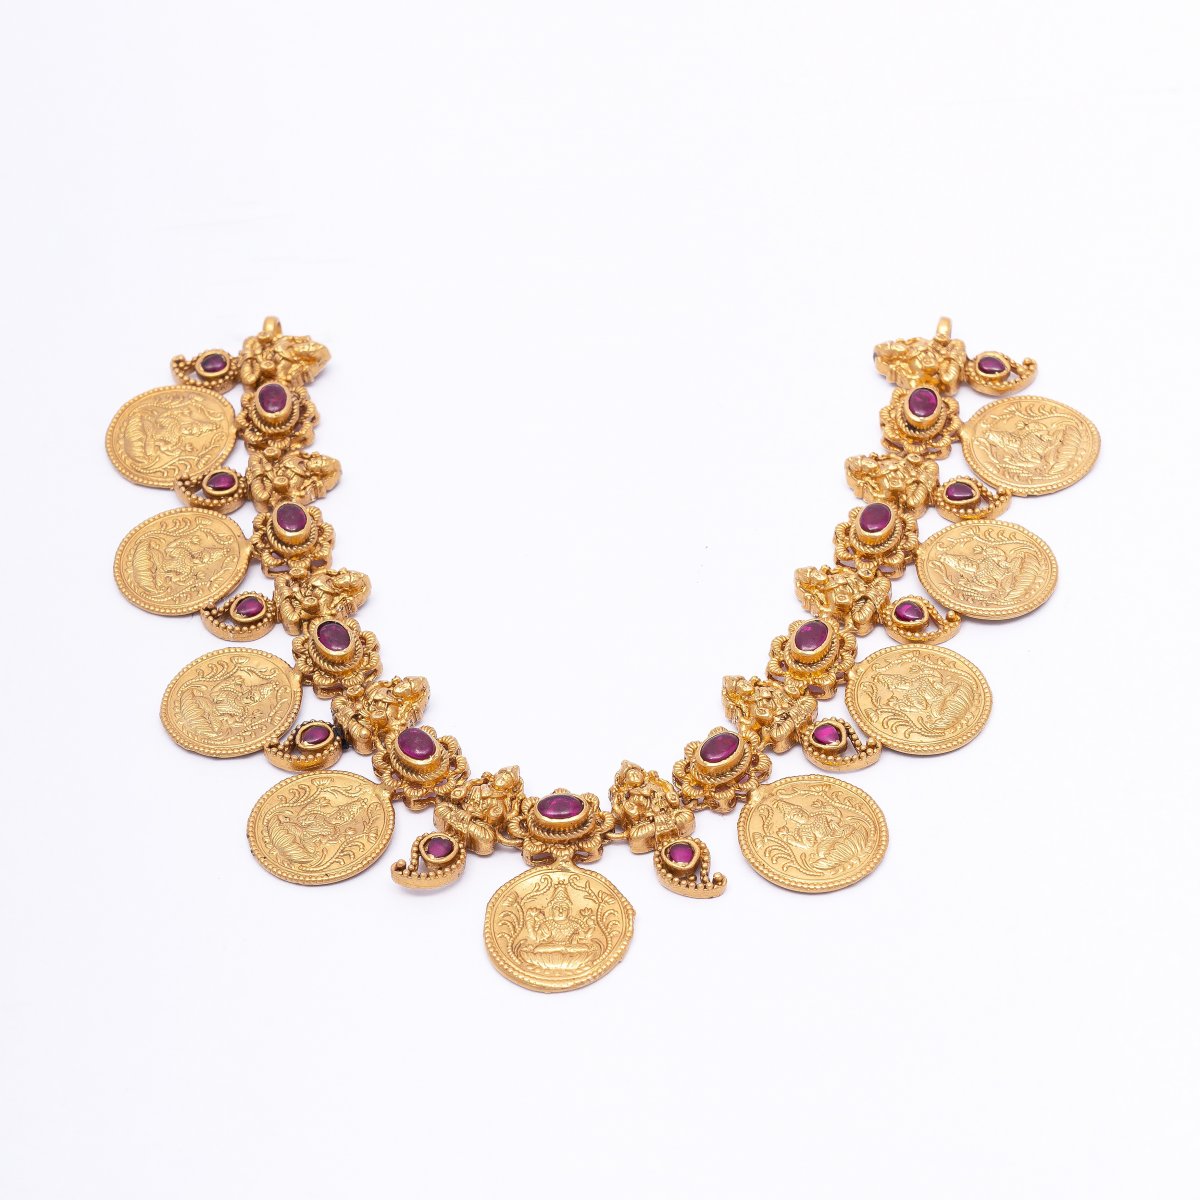 GOLD PLATED TRADITIONAL TEMPLE JEWELLERY SRT LAXMI TEMPLE COIN NECKLACE 